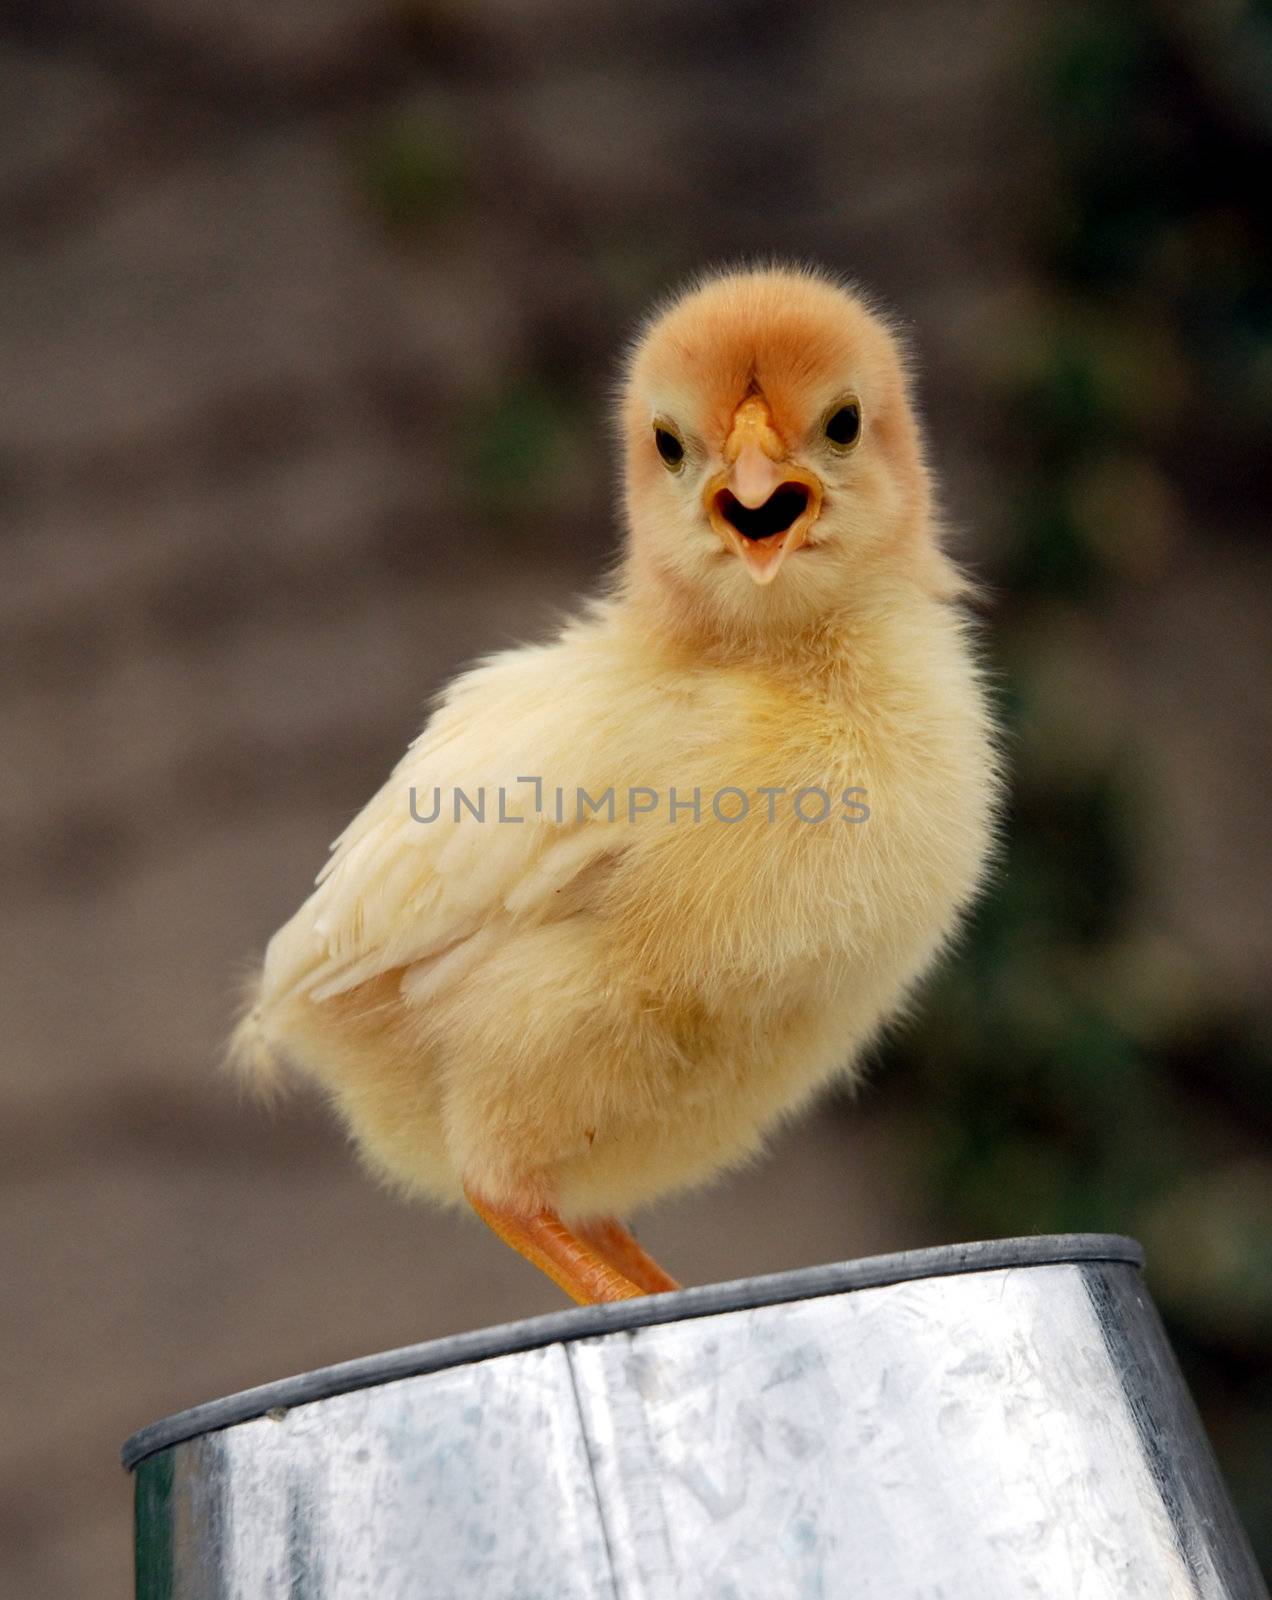 young yellow chick upright on a metal pot